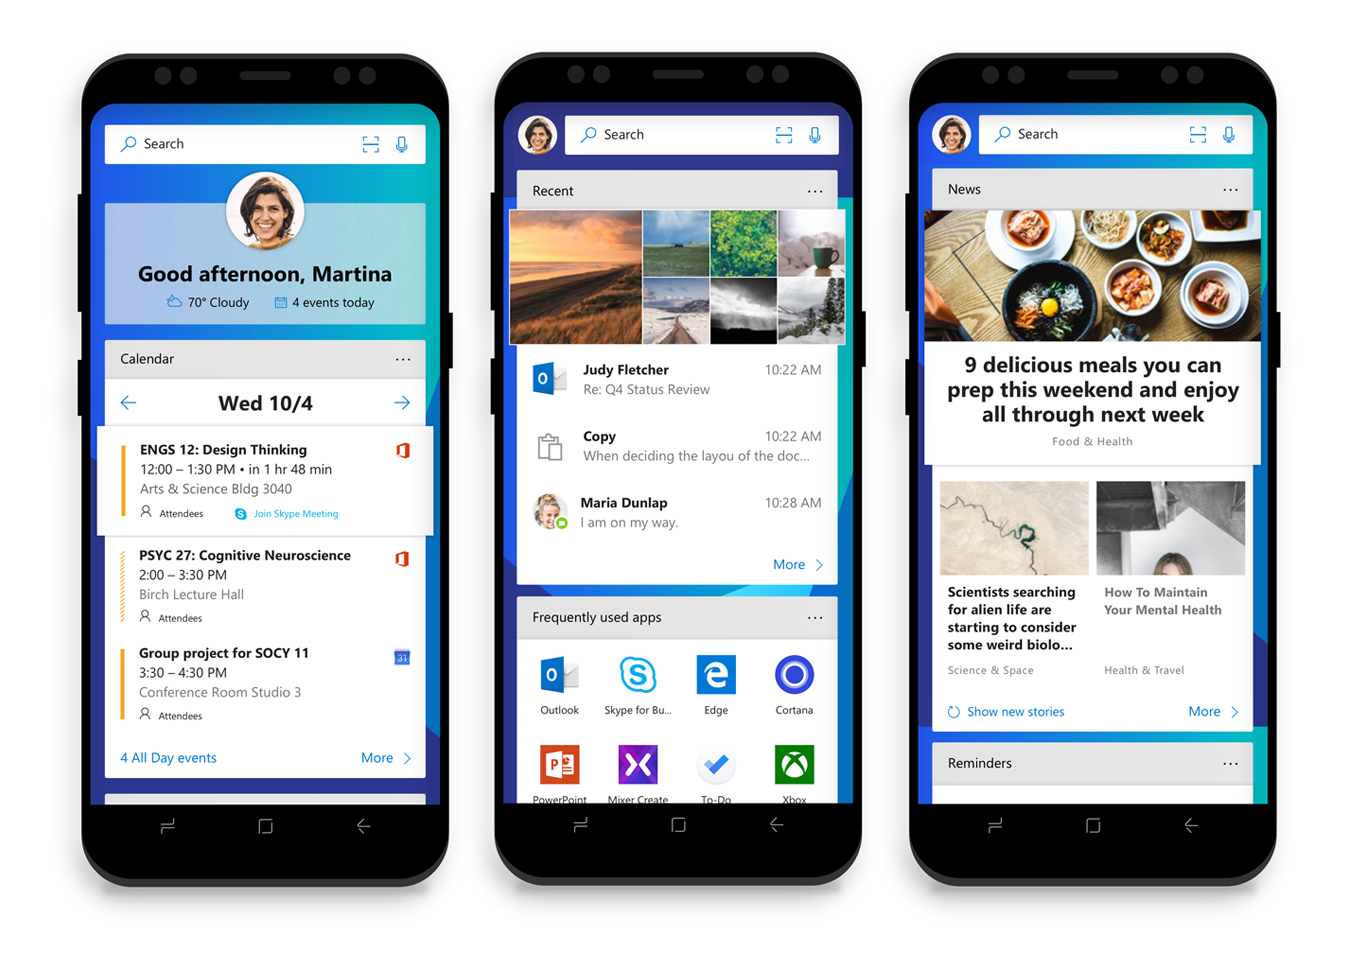 New Microsoft Launcher 5.0.2.47383 version for Android - November 20 8268874d2e645d4bb0948d74441562cd.png